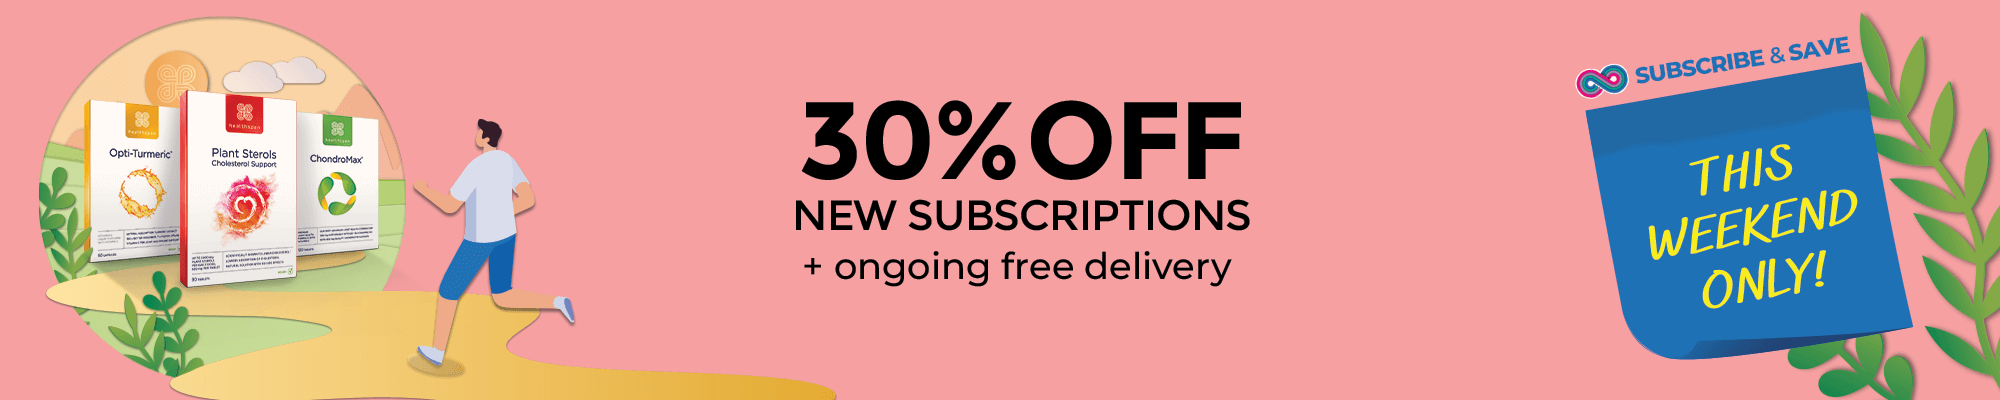 This weekend only! 30% off new subscriptions + ongoing free delivery.